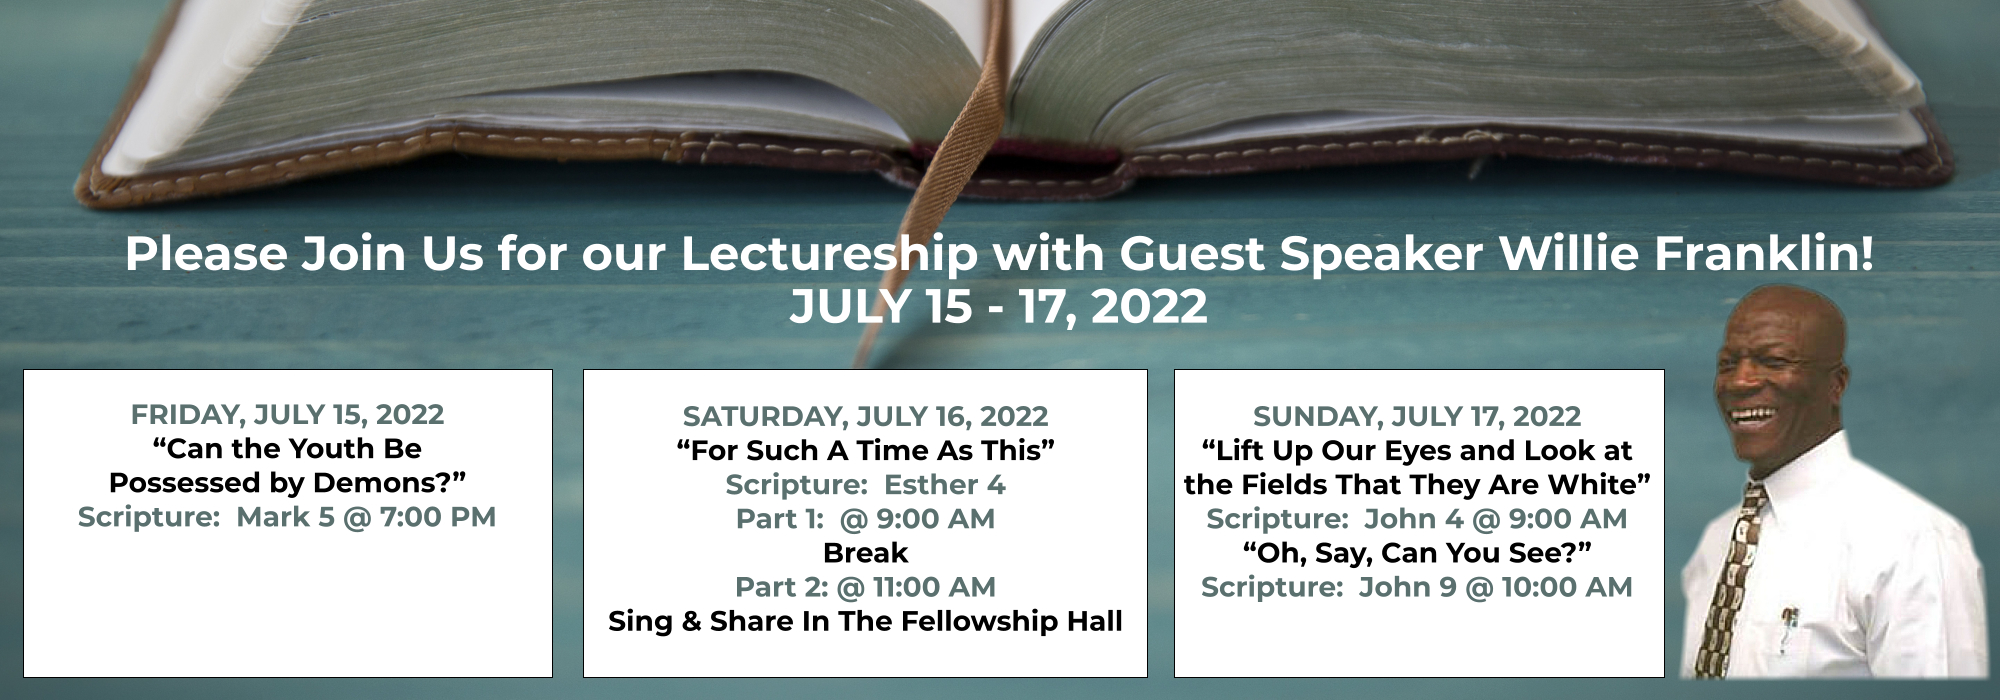 lectureship